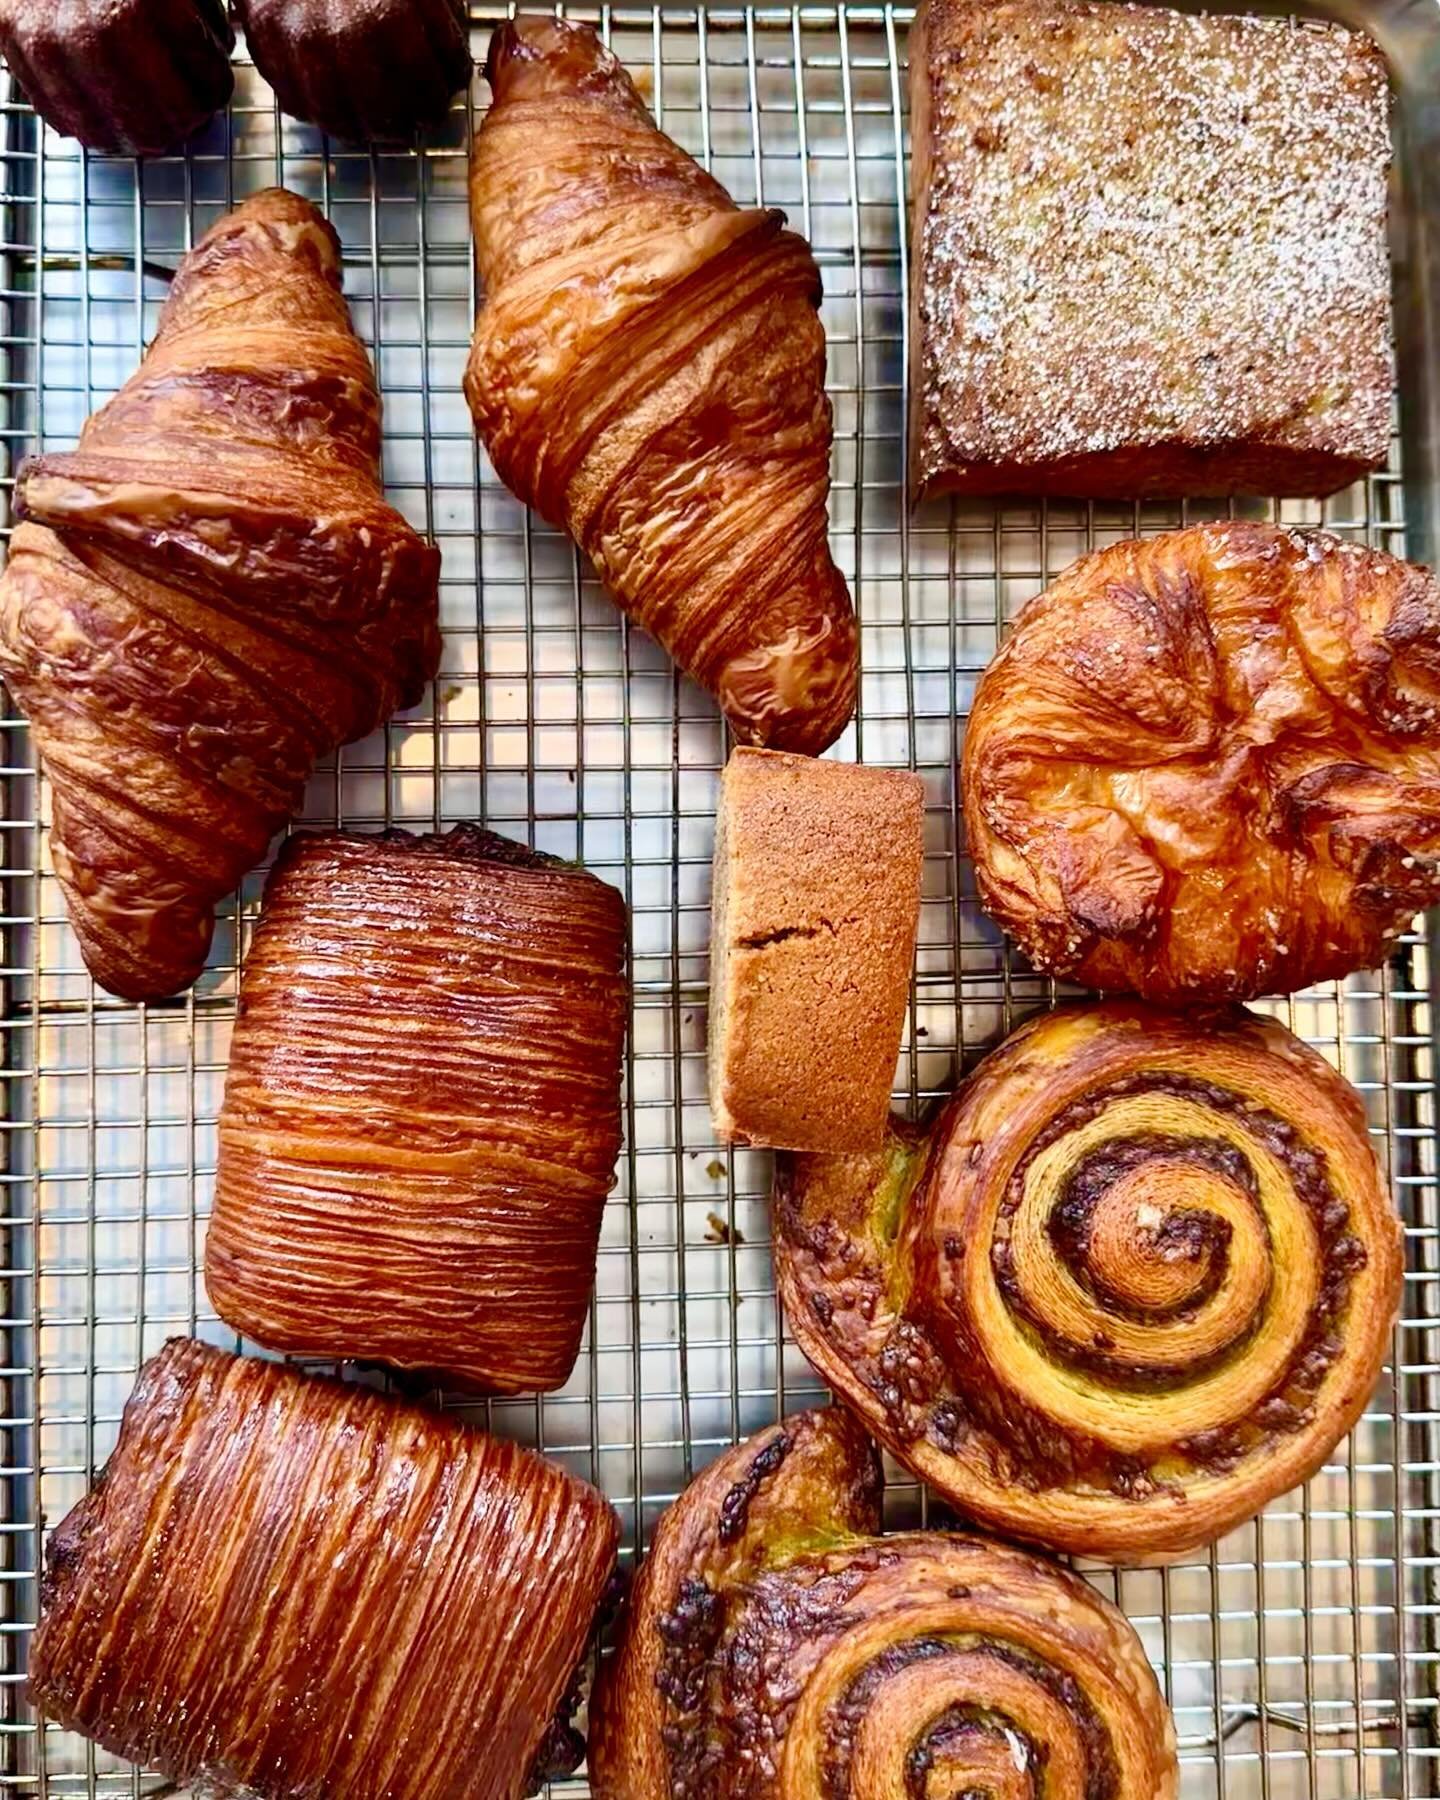 My neighborhood&rsquo;s carbs are better than yours. A few I&rsquo;m loving lately, in no particular order&hellip;

1. @laurelbakerynyc morning selection including that ramp &amp; cantal escargot situation, which may be the best kind of escargot situ